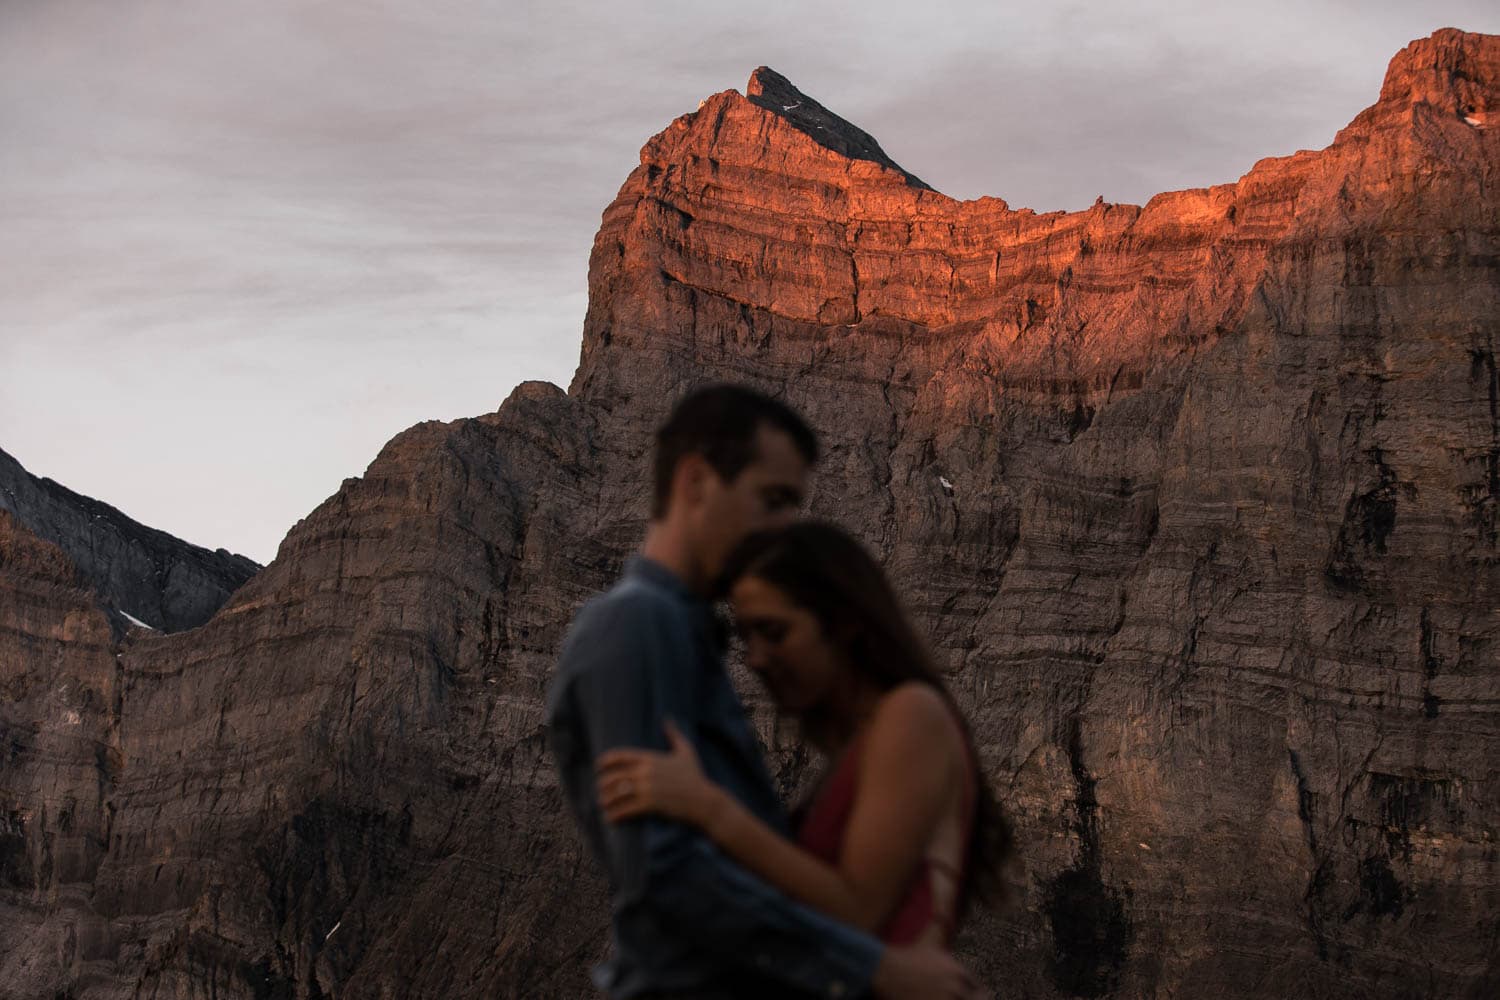 Couple at sunrise in the mountains